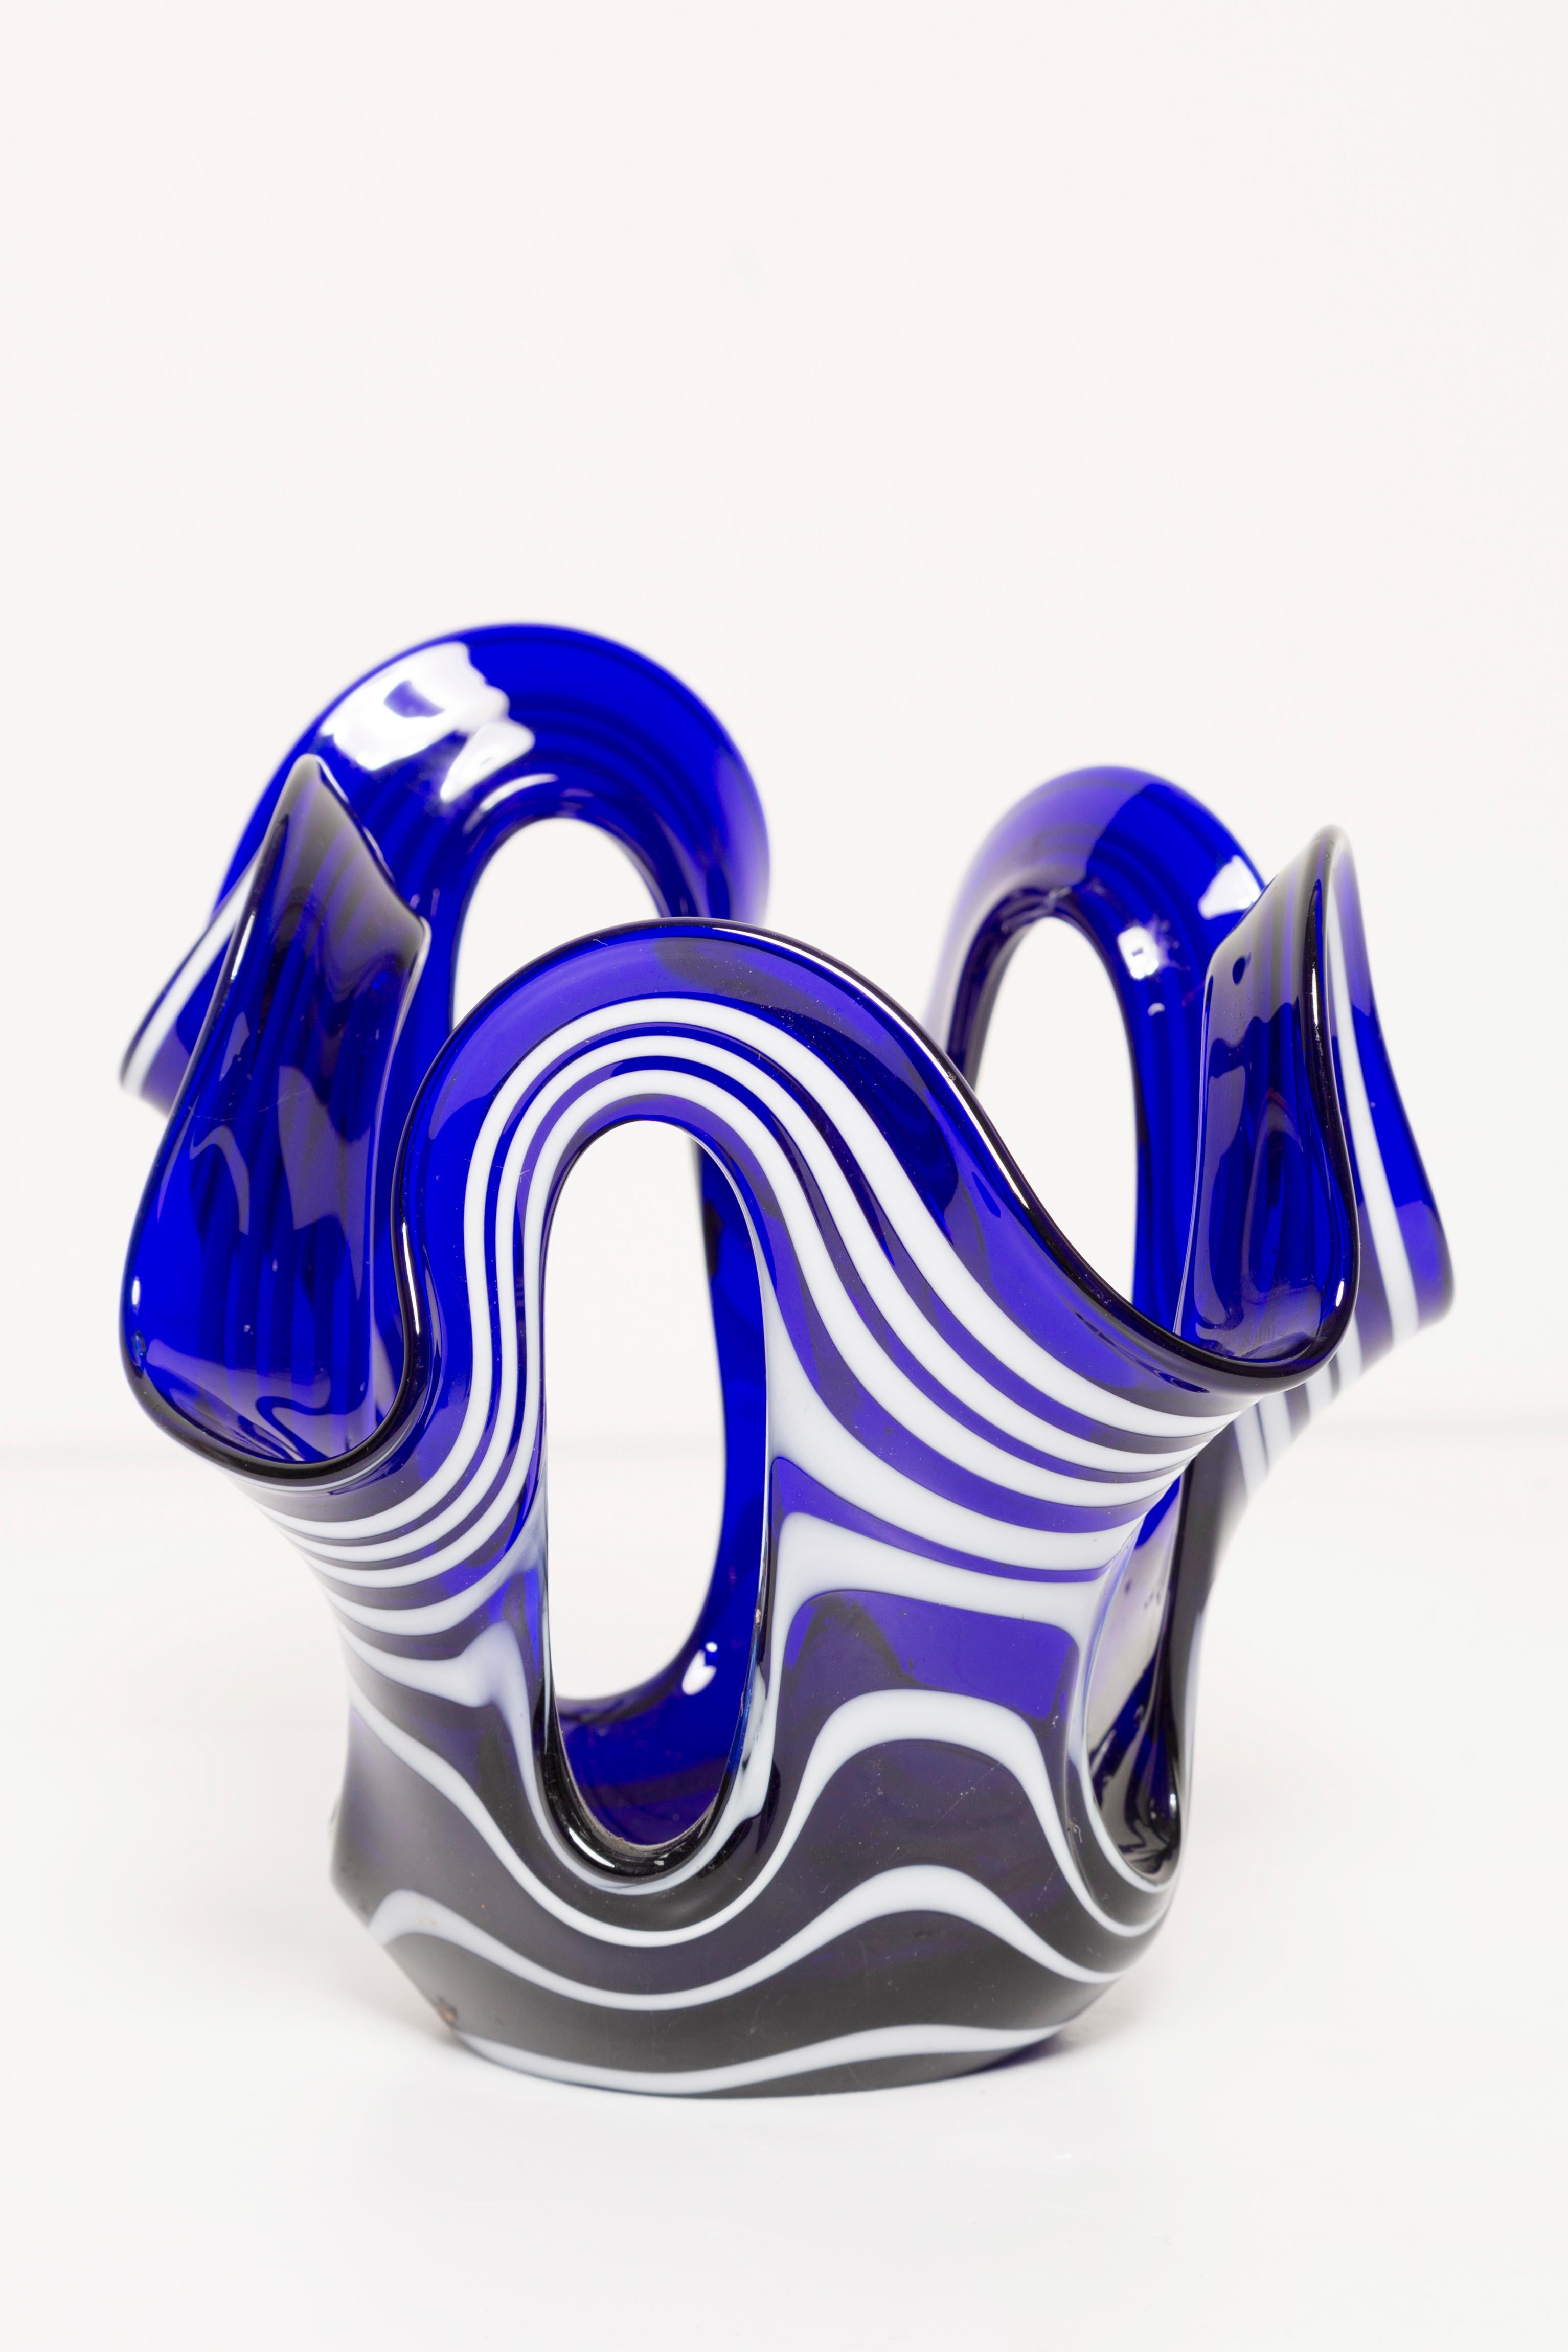 Mid-Century Modern Small Mid-Century Ultramarine Blue and White Vase, Europe, 1960s For Sale